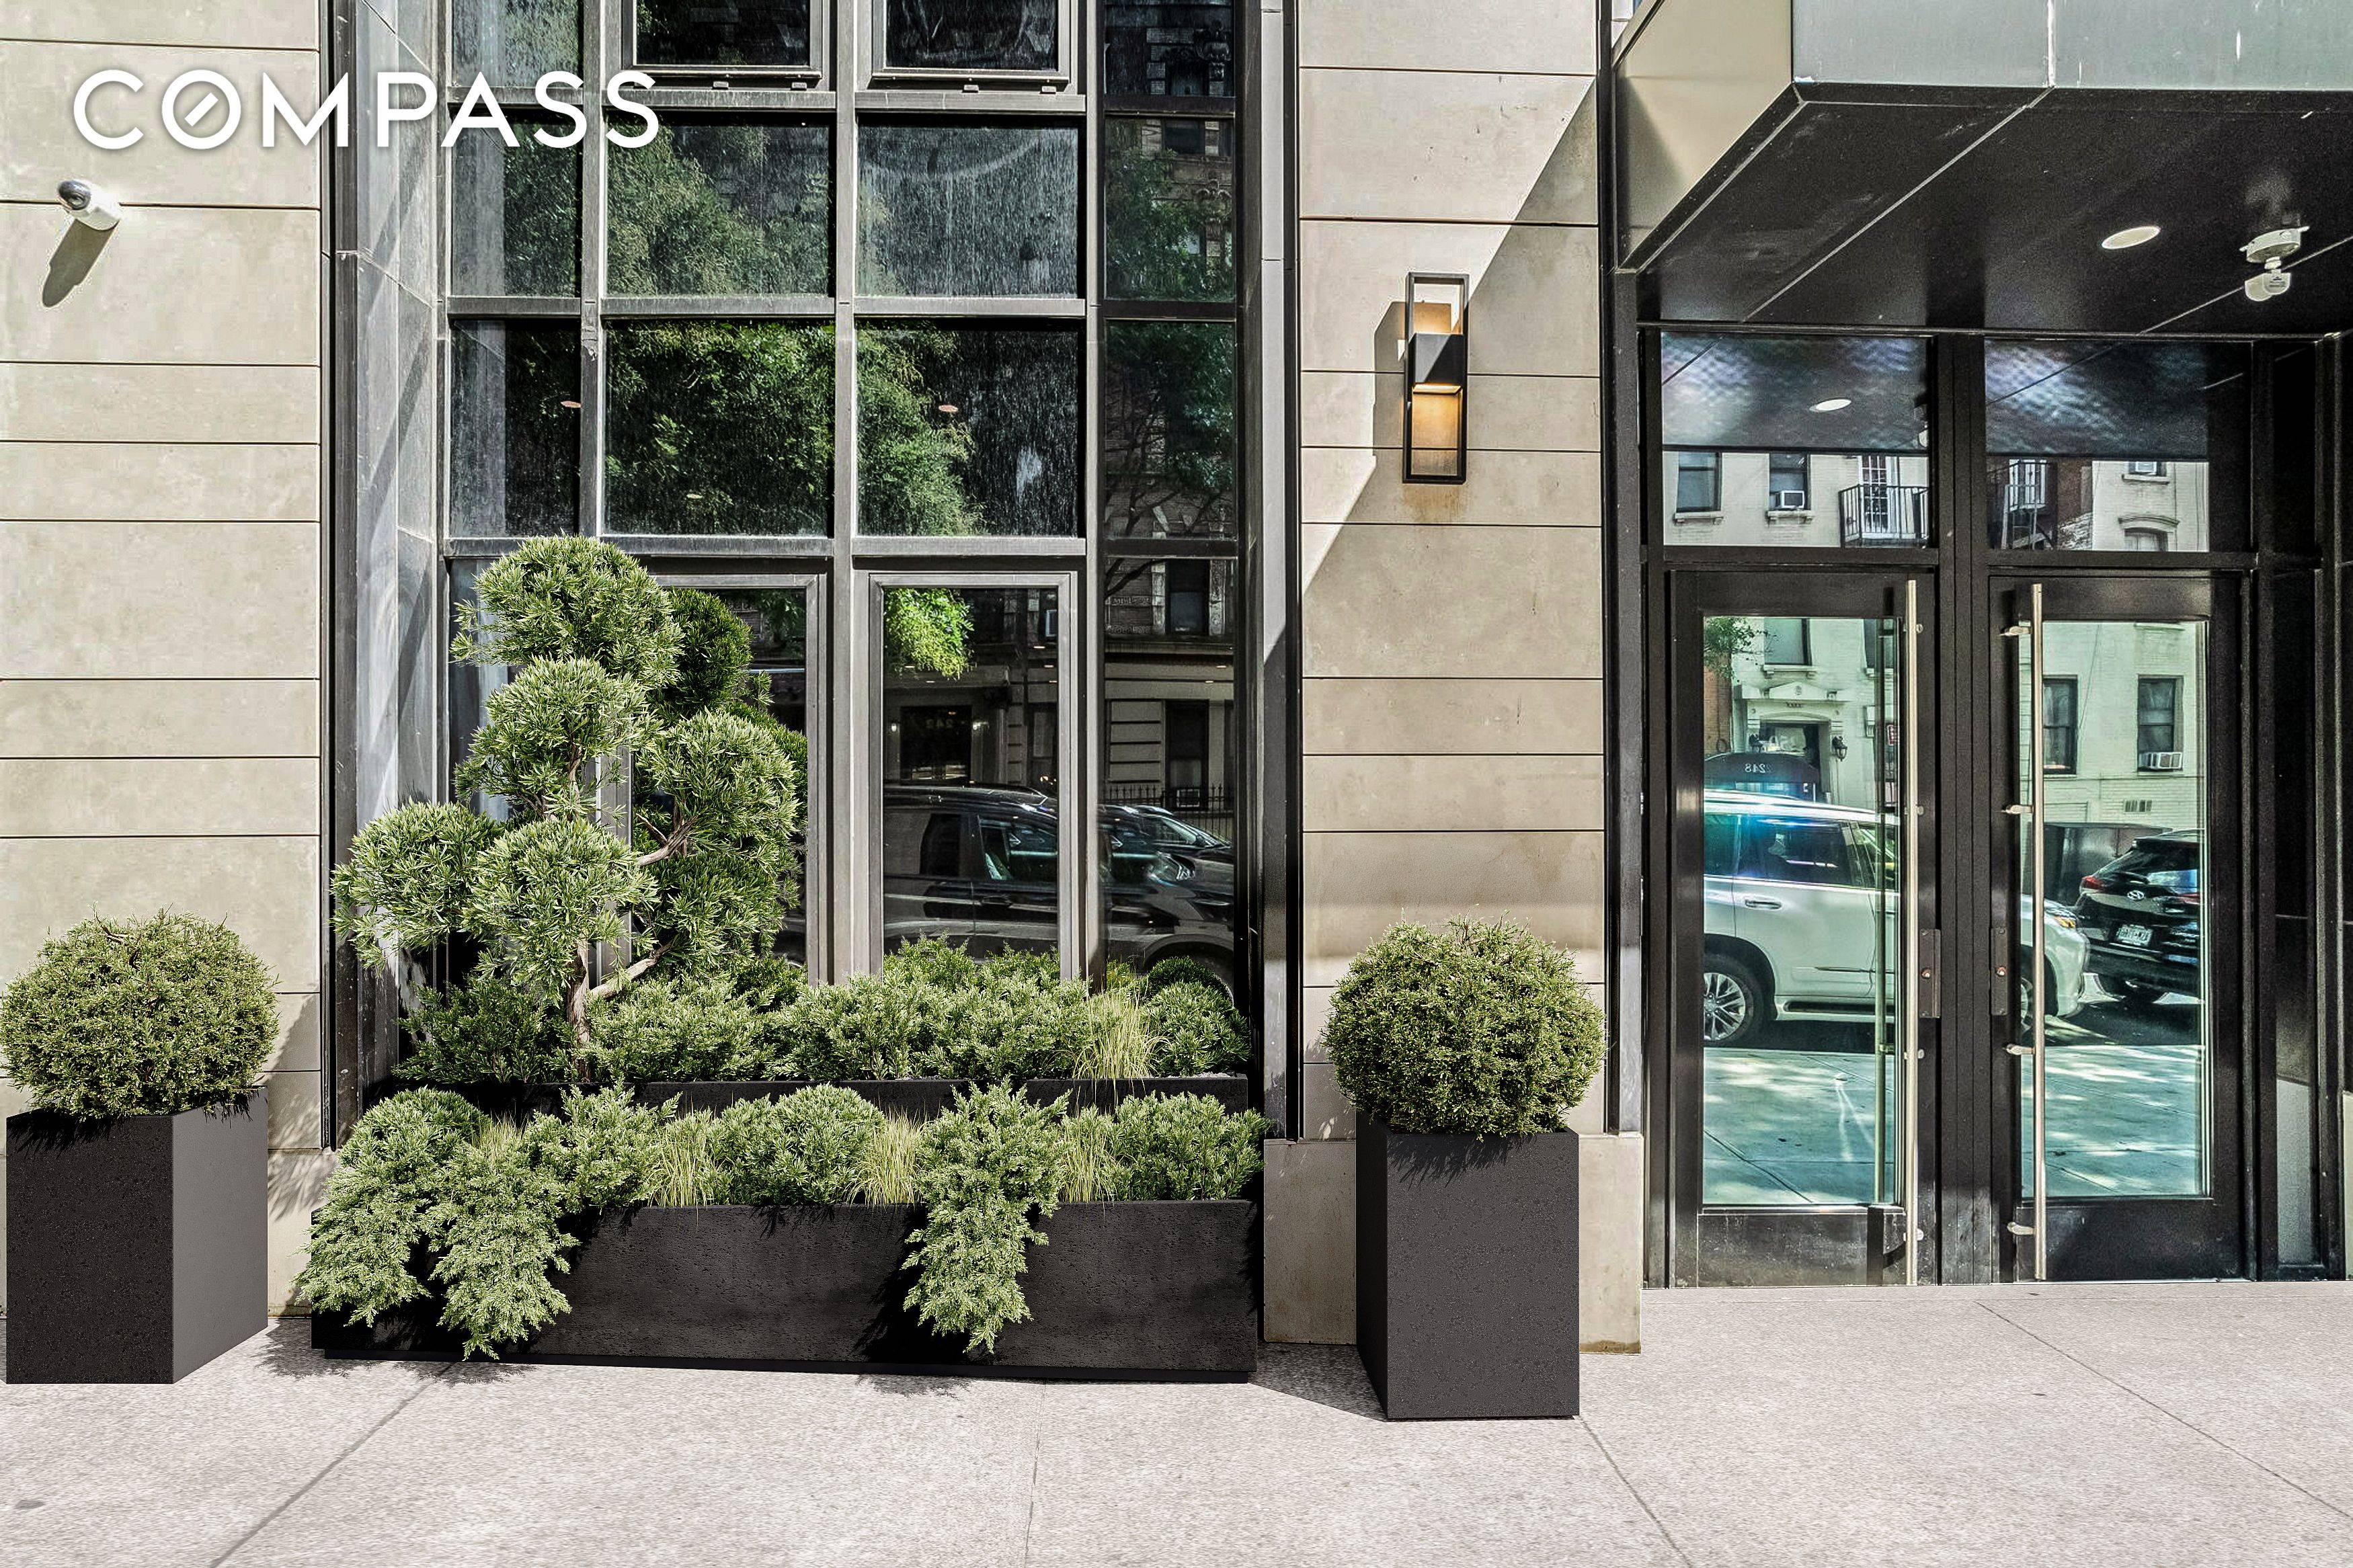 BRAND NEW LUXURY BOUTIQUE CONDO BUILDING IN MIDTOWN EAST.